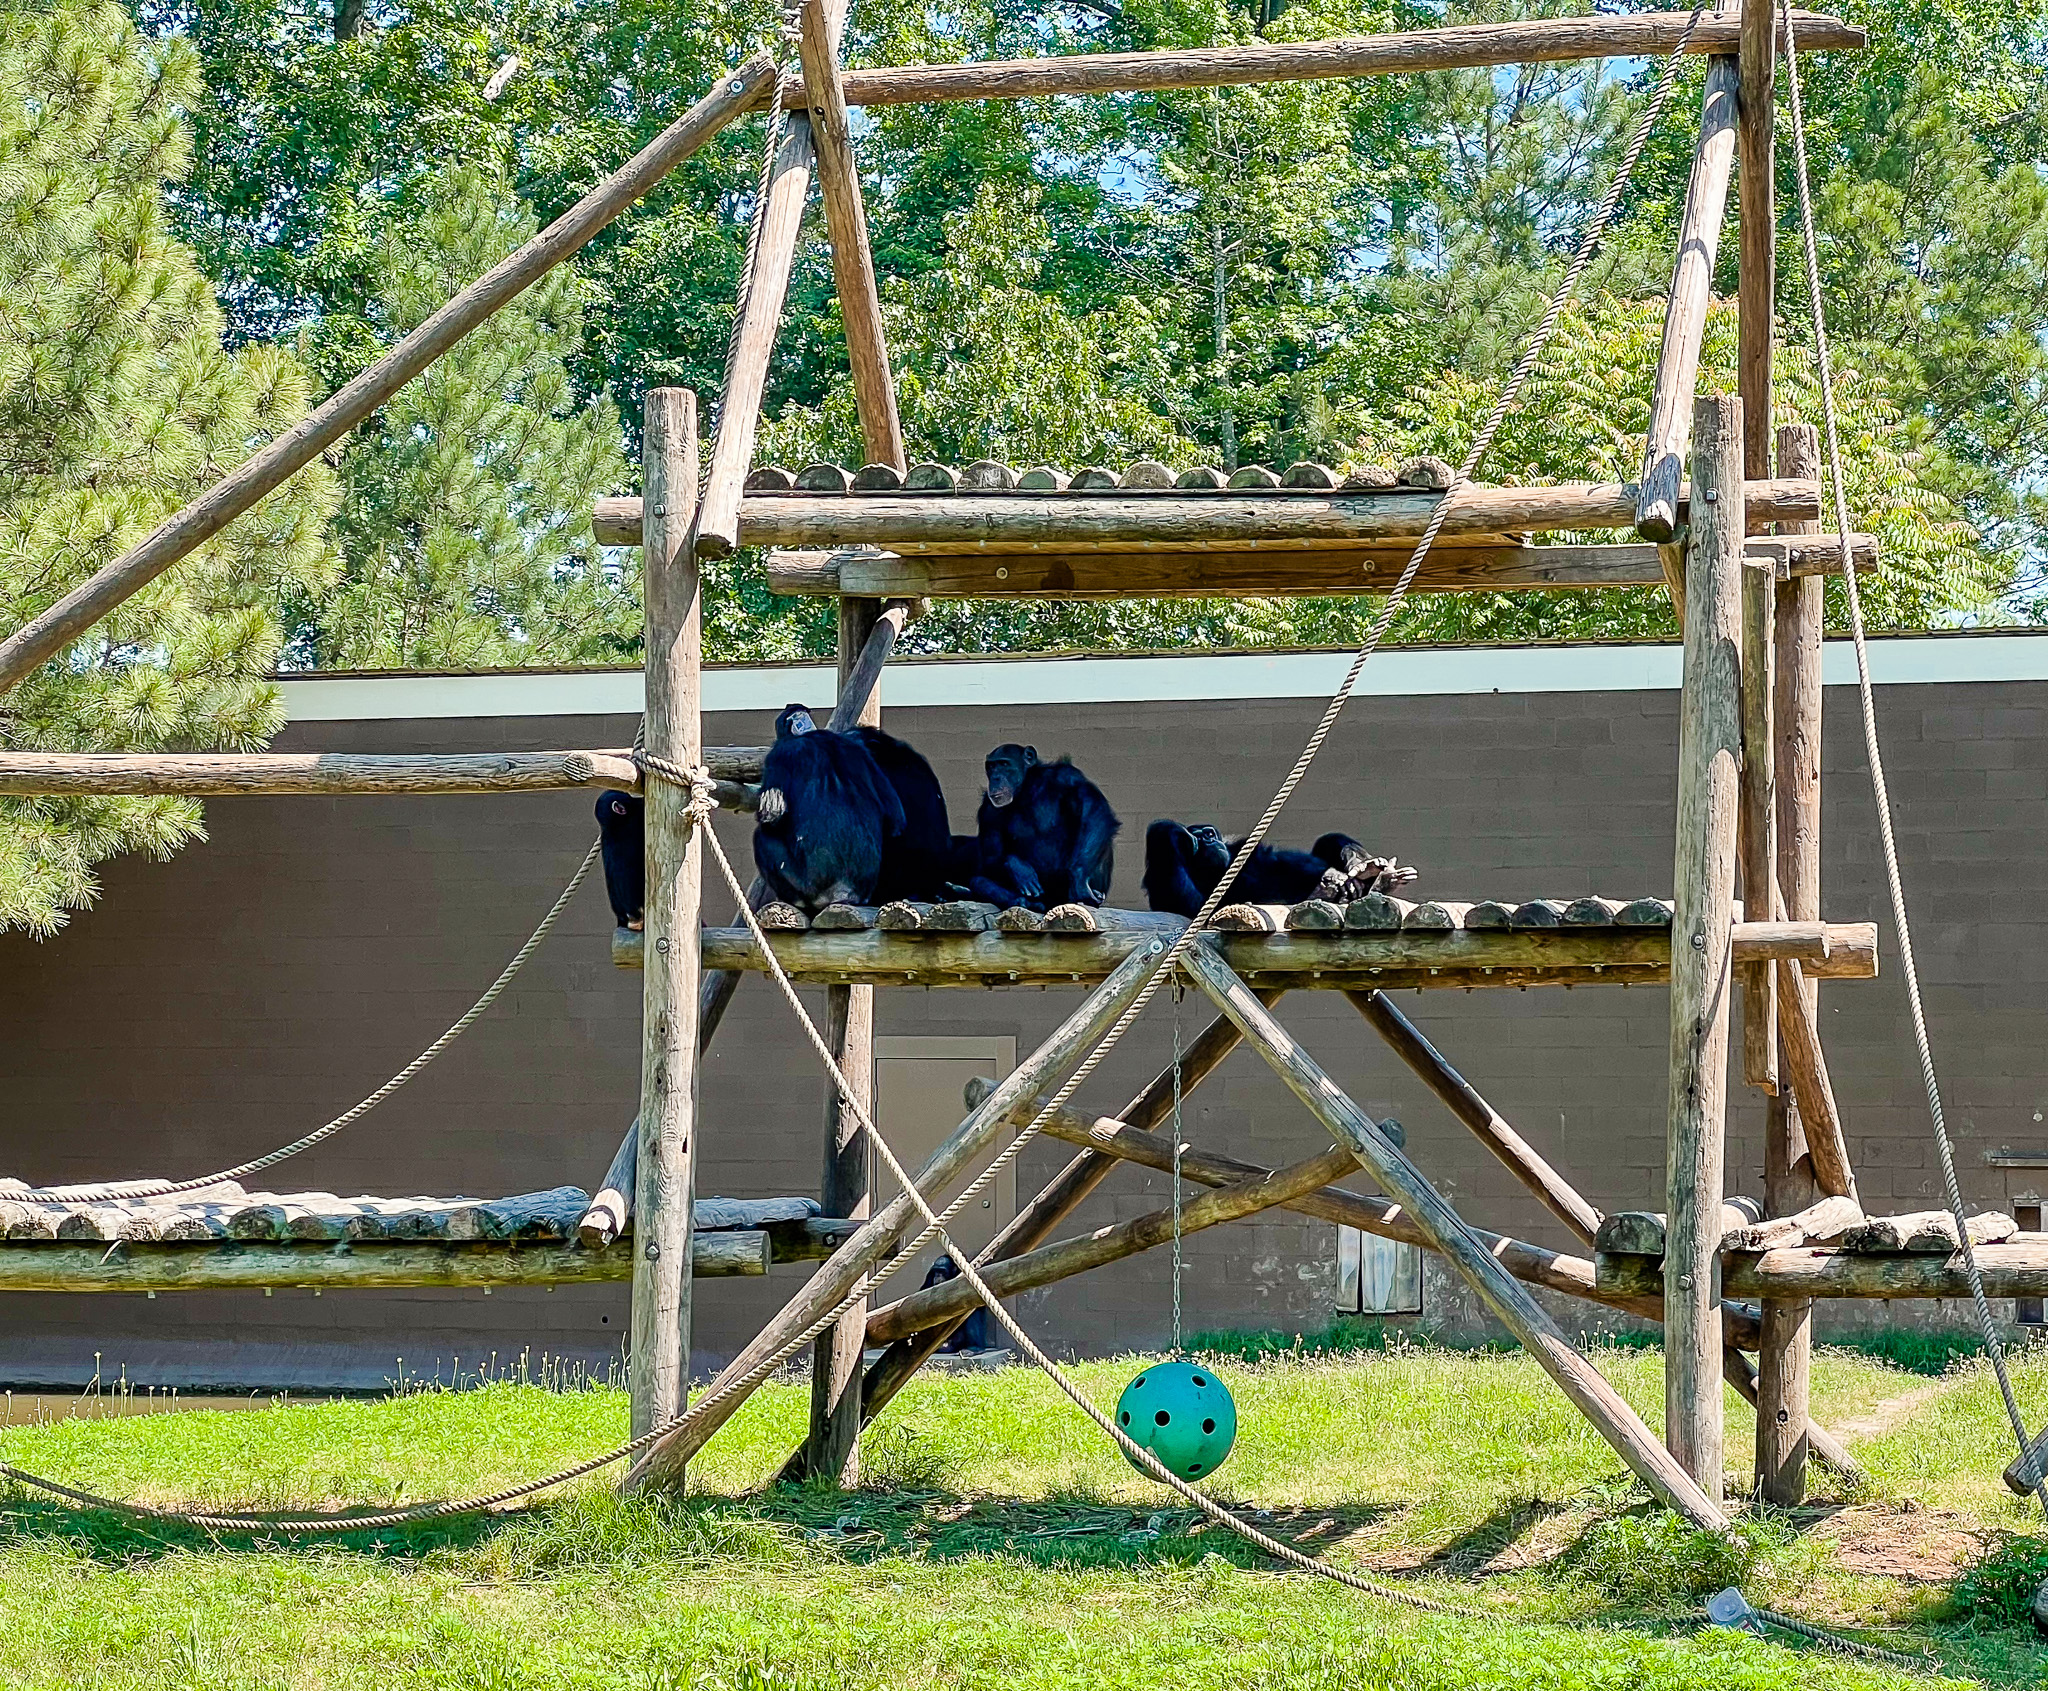 siamangs playing at the richmond zoo